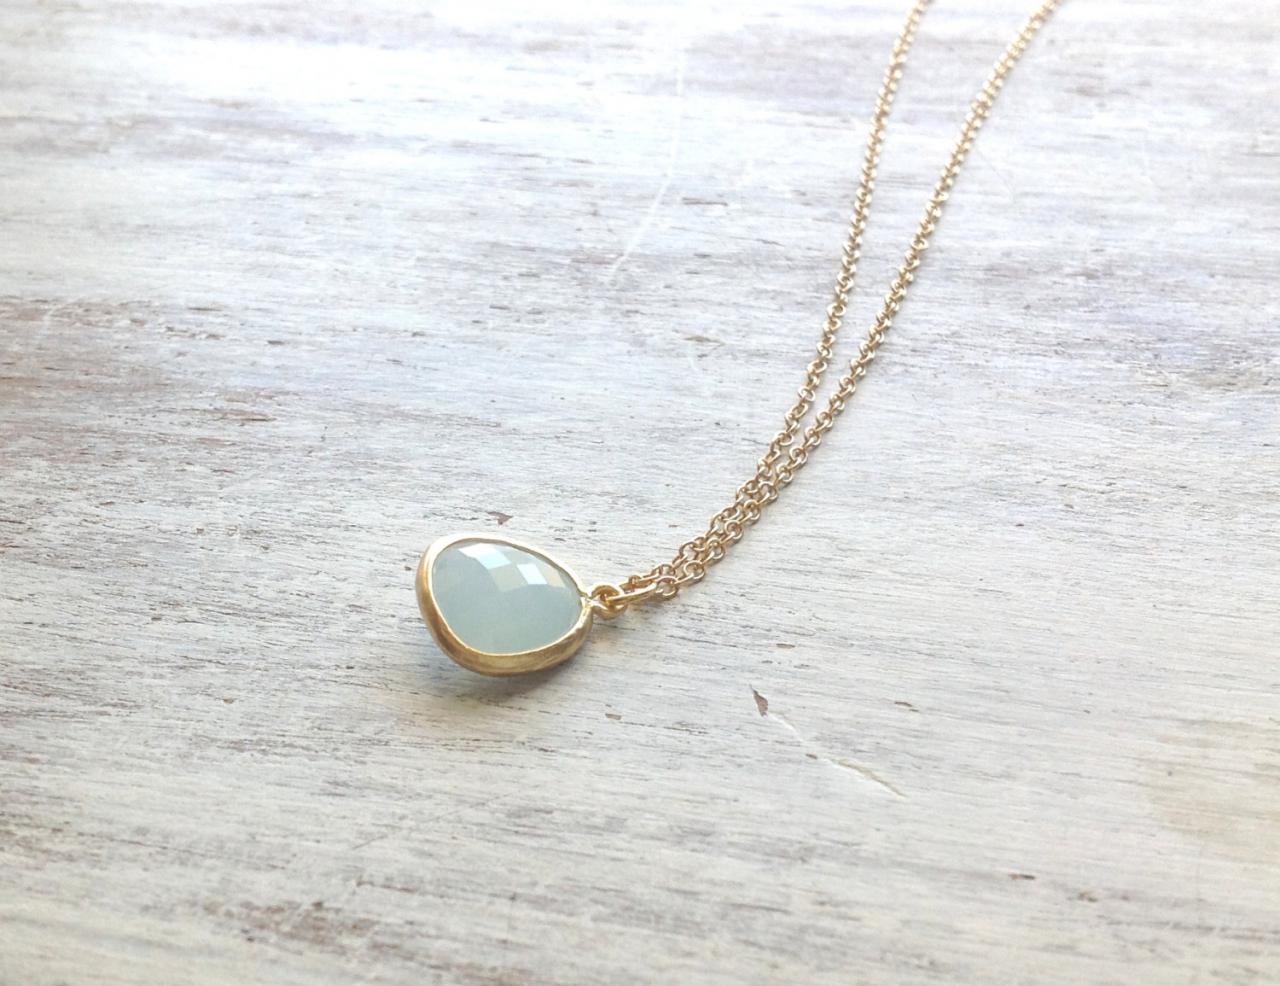 Gold Necklace, Bridesmades Necklace, Crystal Glass Stone, Delicate Necklace, Blue Necklace, Wedding Jewelry -582